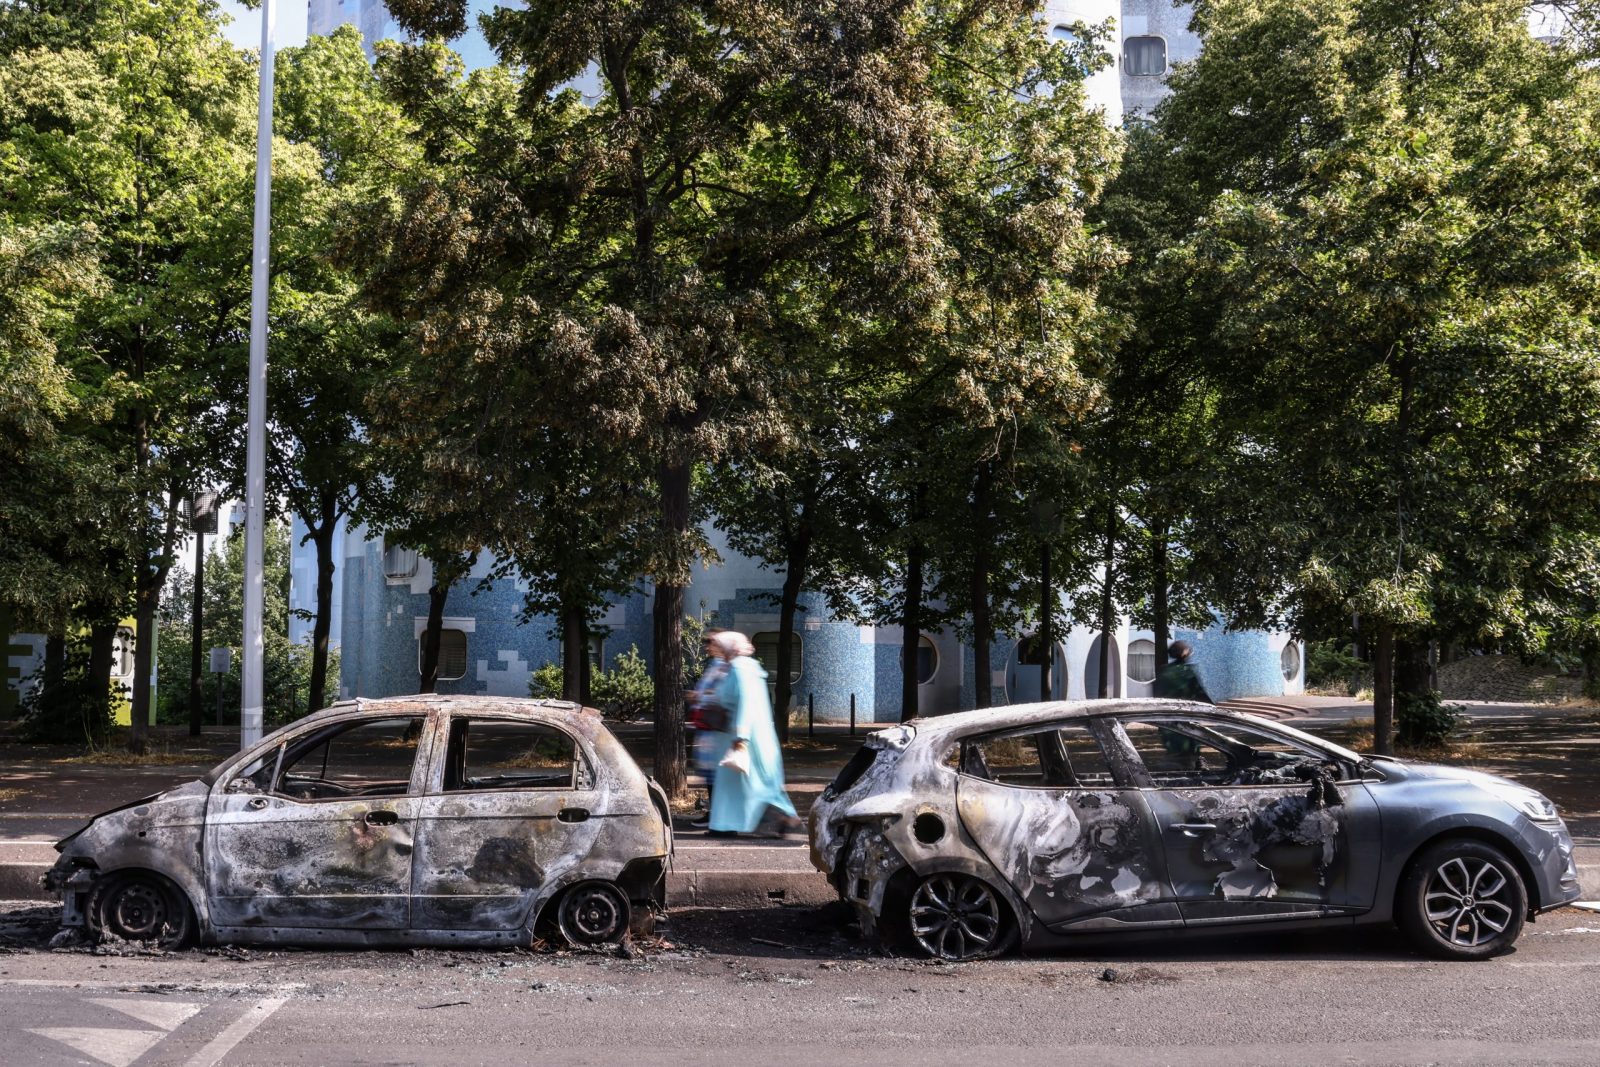 epa10715187 People walk past burnt out car on avenue Pablo Picasso following a night of civil unrest, in Nanterre, near Paris, France, 28 June 2023. The violence broke out after police fatally shot a 17-year-old during a traffic stop in Nanterre. According to the French interior minister, 31 people were arrested with 2,000 officers being deployed to prevent further violence.  EPA/Mohammed Badra